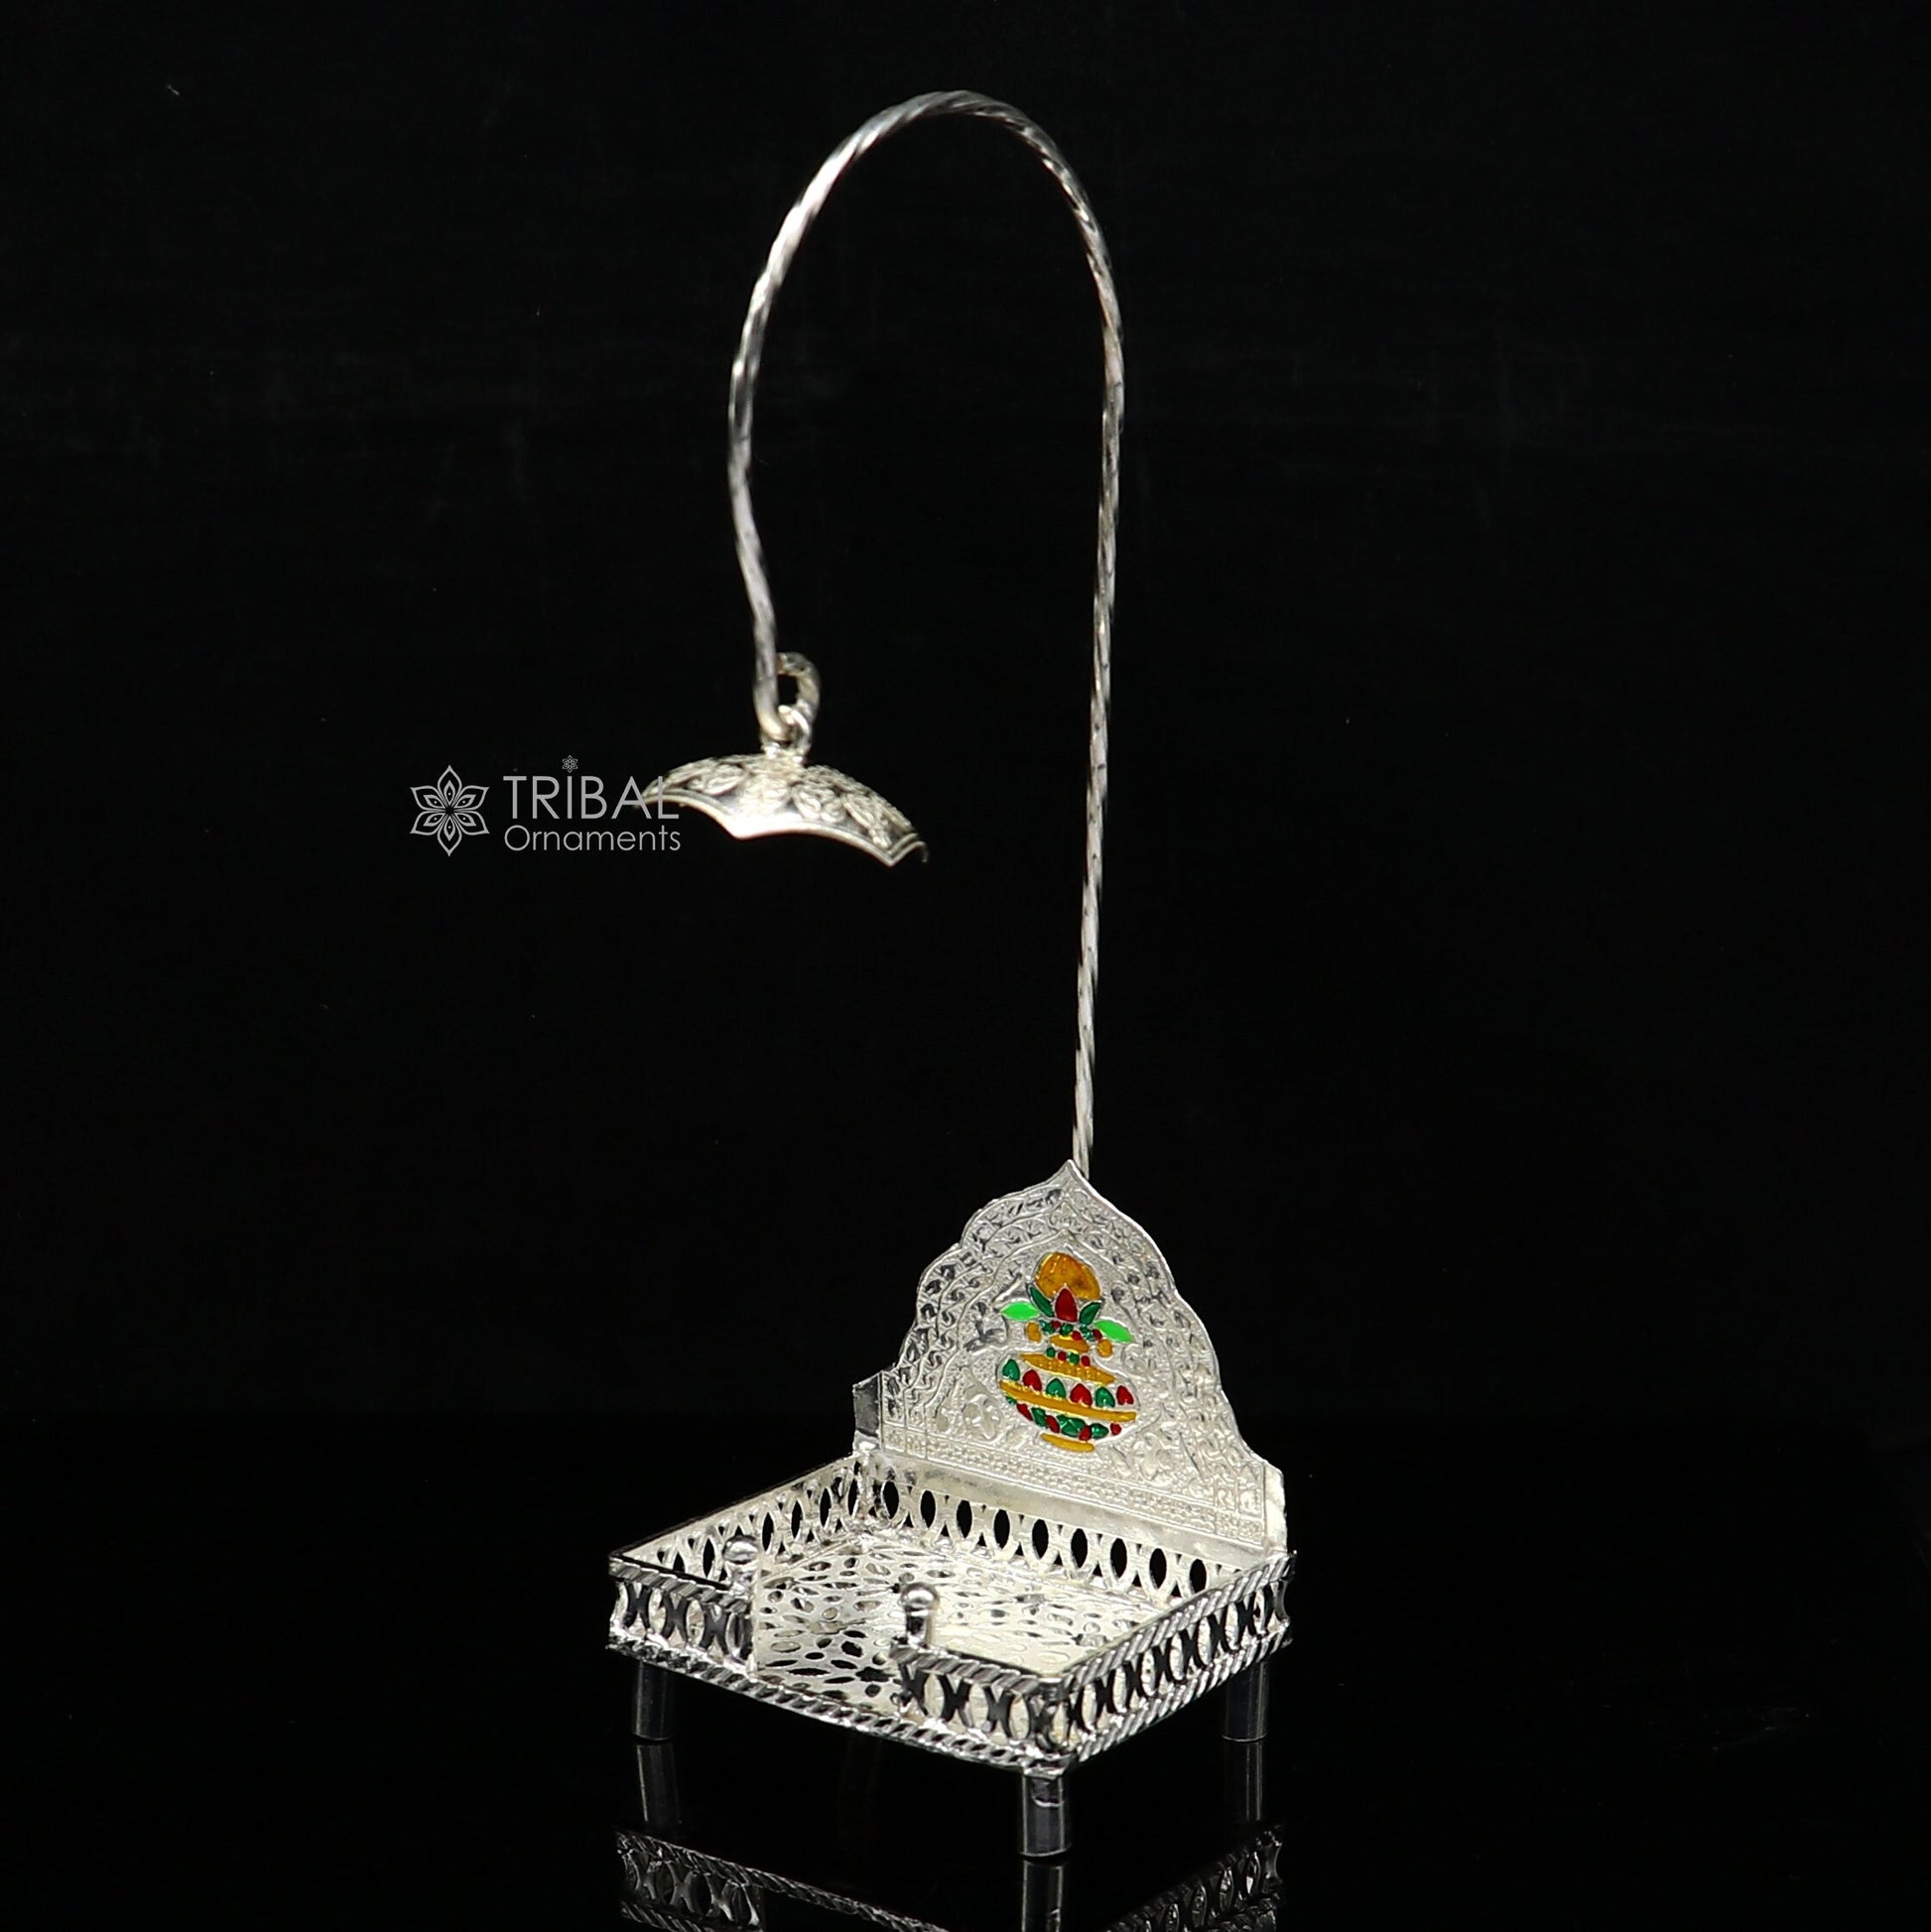 925 pure sterling silver handcrafted small sinhasan, idol krishna Bal Gopala throne, god statue's stand chair temple art puja article su1168 - TRIBAL ORNAMENTS